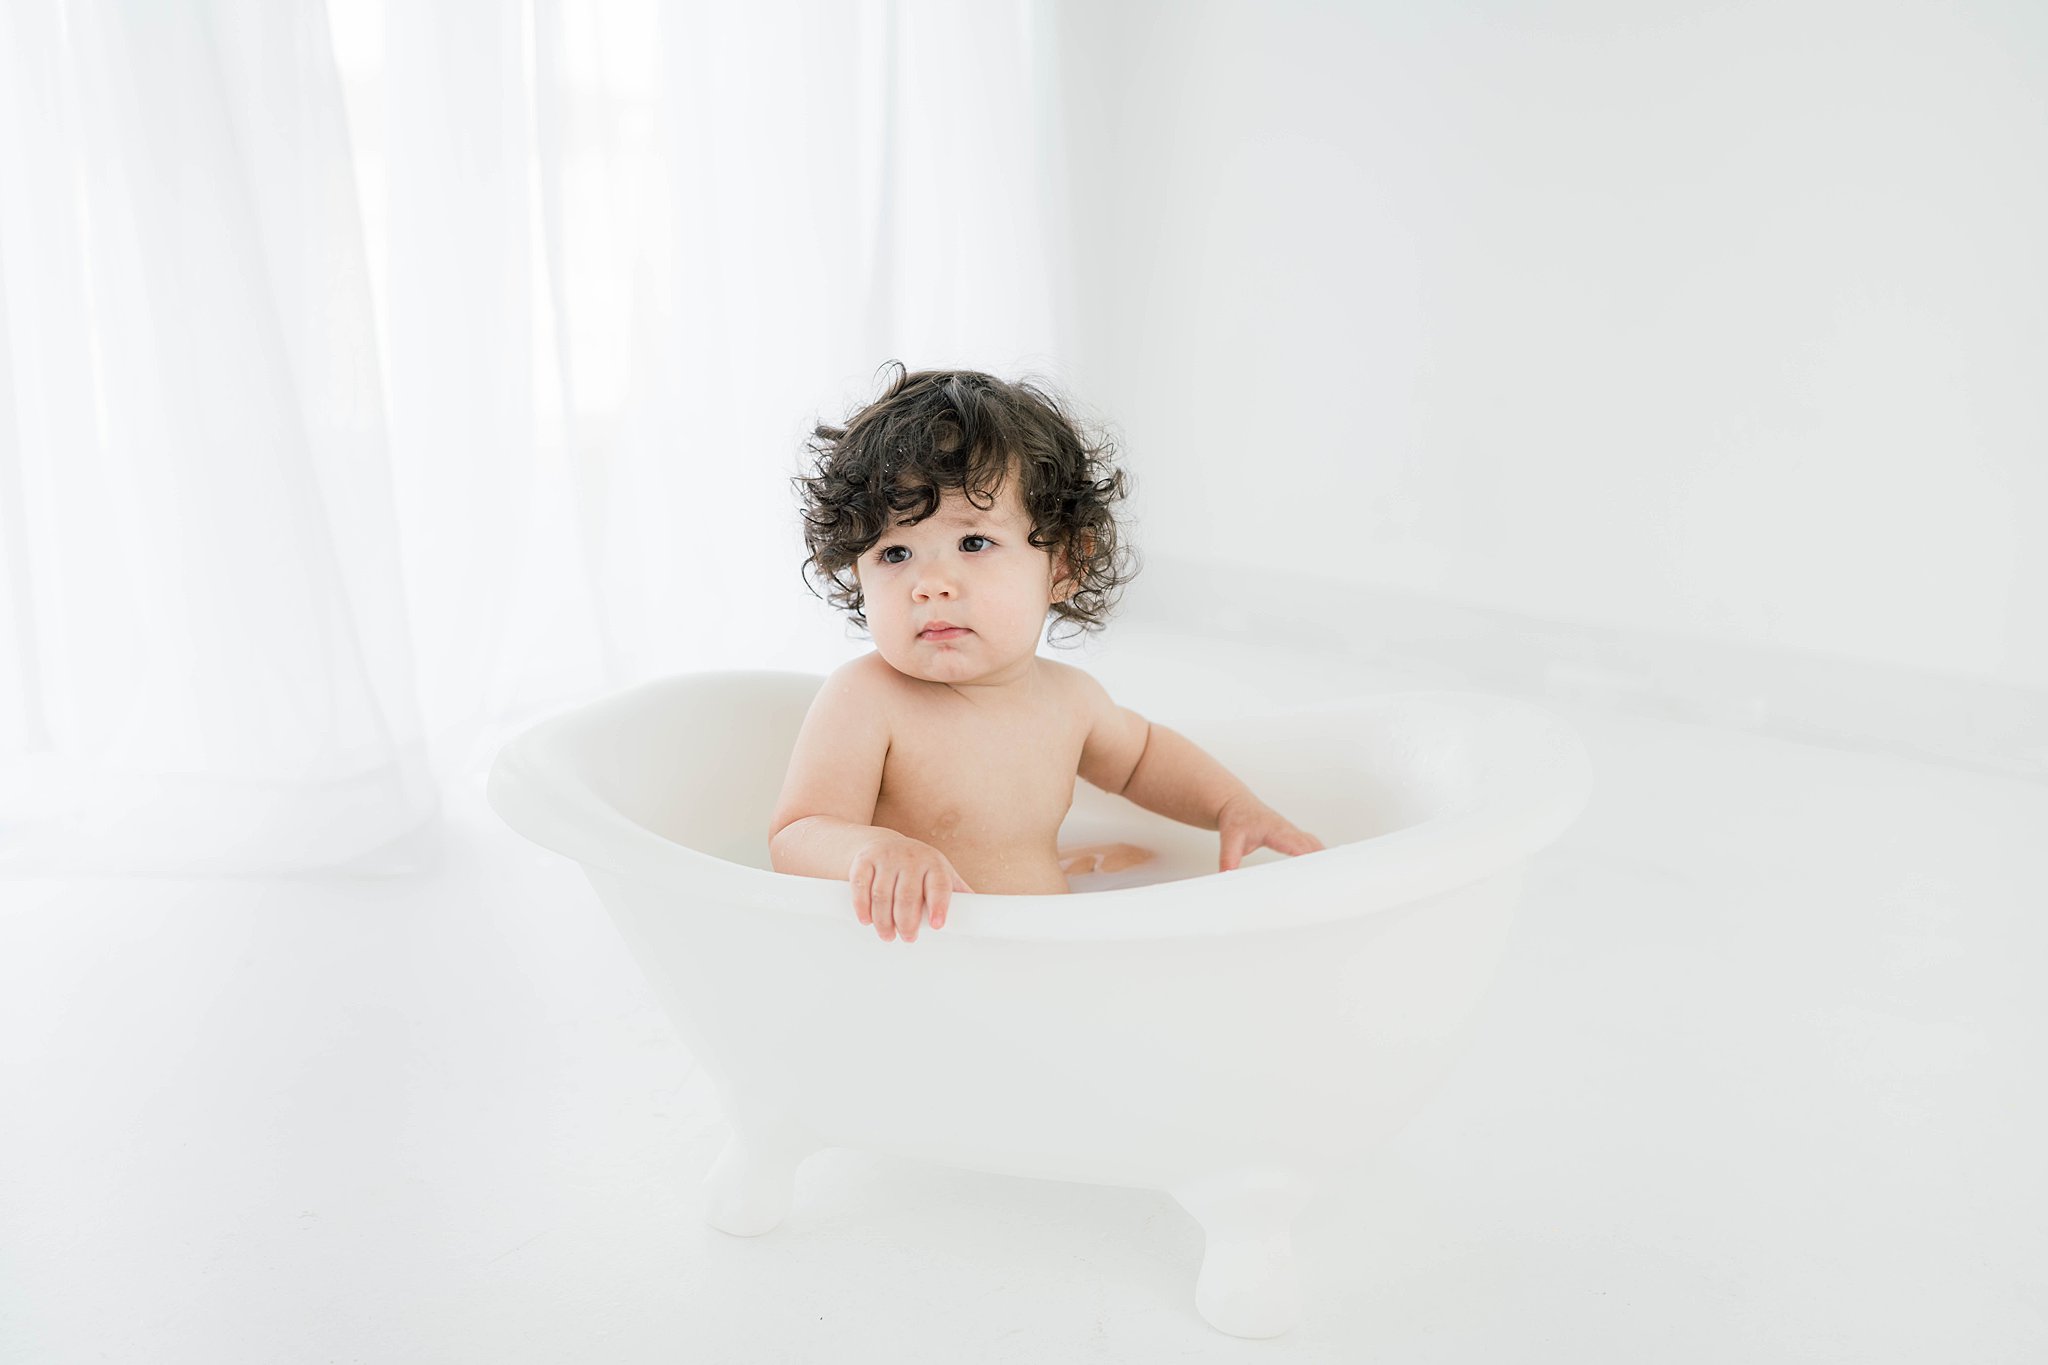 A young toddler with dark curly hair sits on a tiny bathtub in a white room in front of a window baby furniture Oklahoma